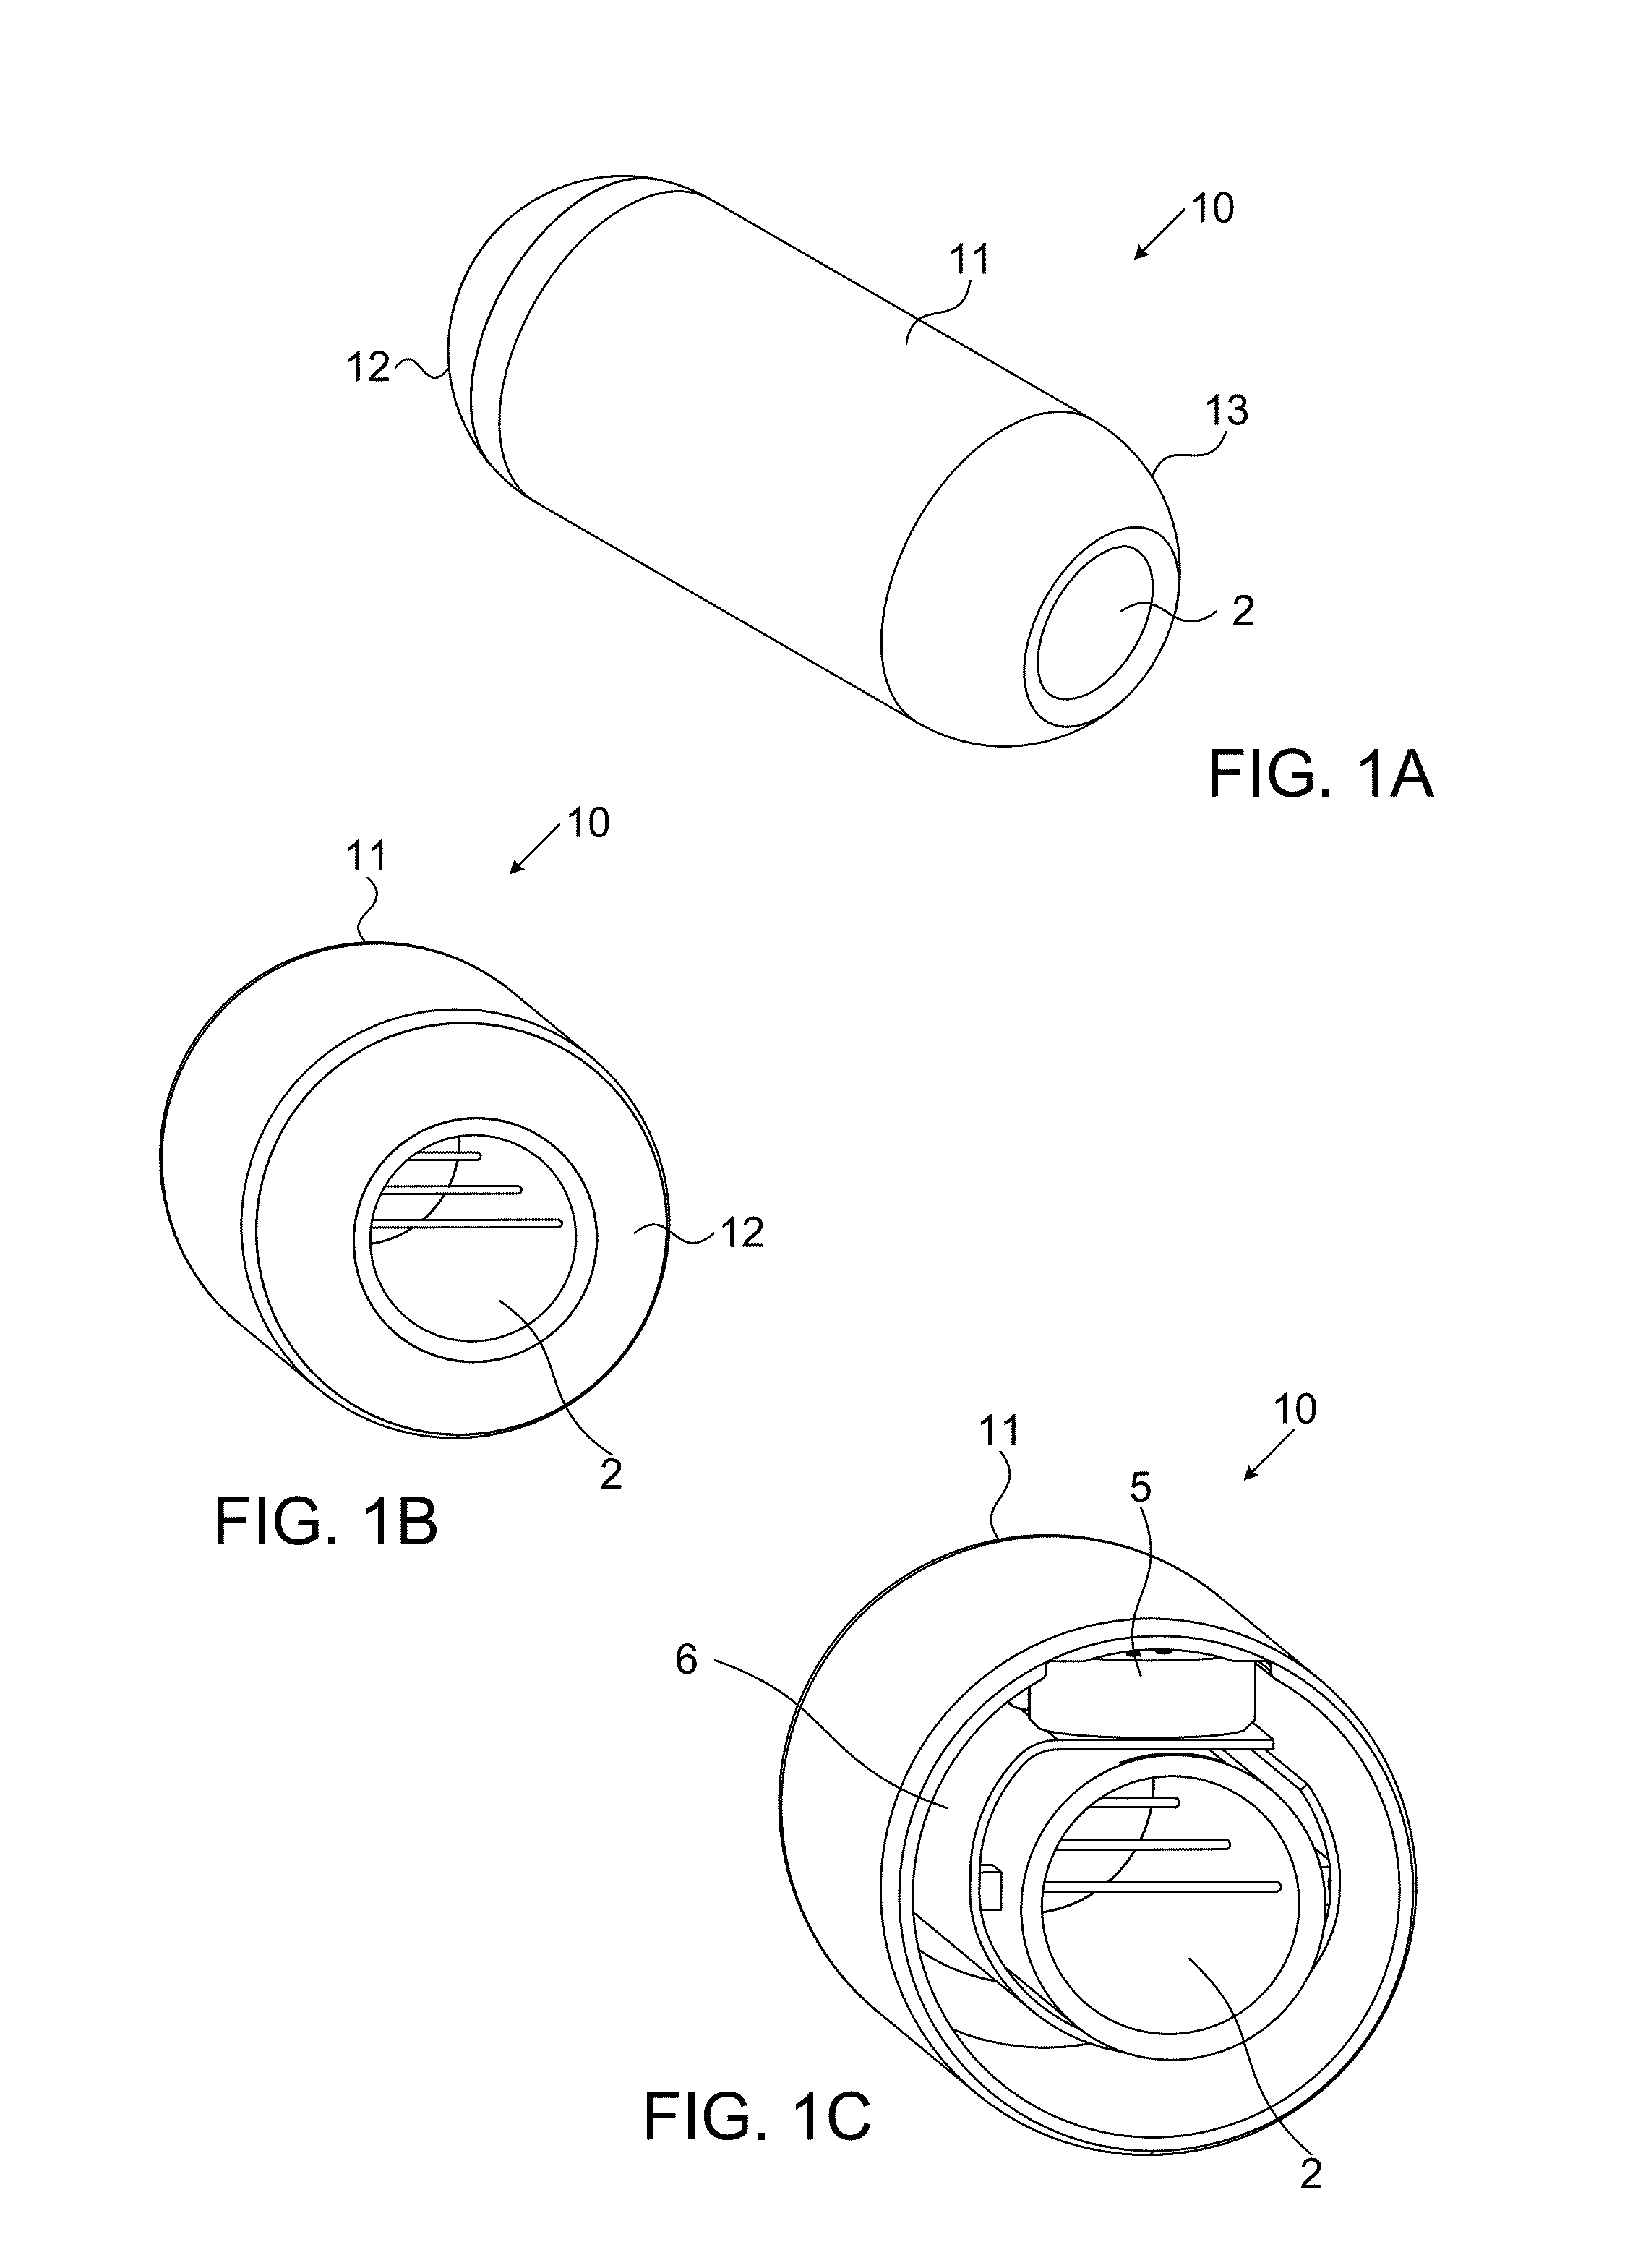 Device, system and method for in-vivo detection of bleeding in the gastrointestinal tract